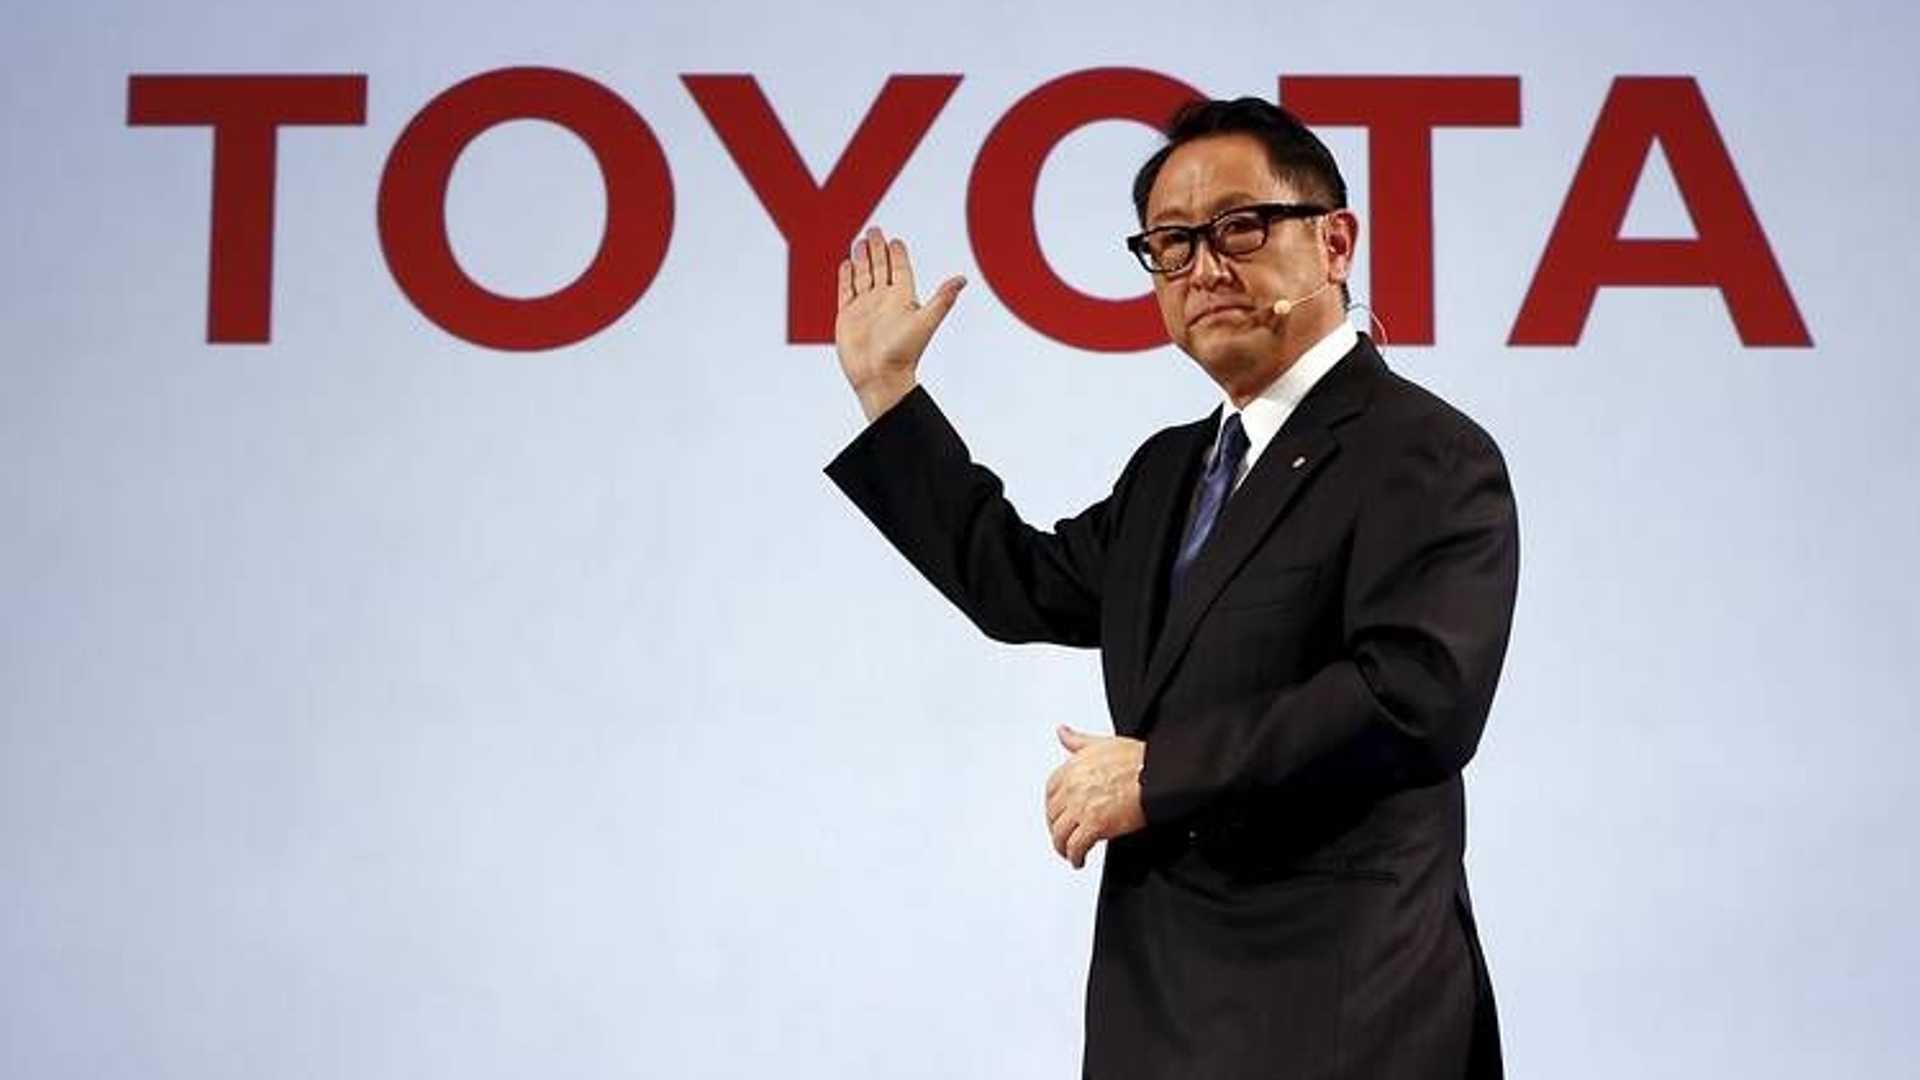 Akio Toyoda Steps Down As CEO of Toyota, Becomes Chairman of the Board